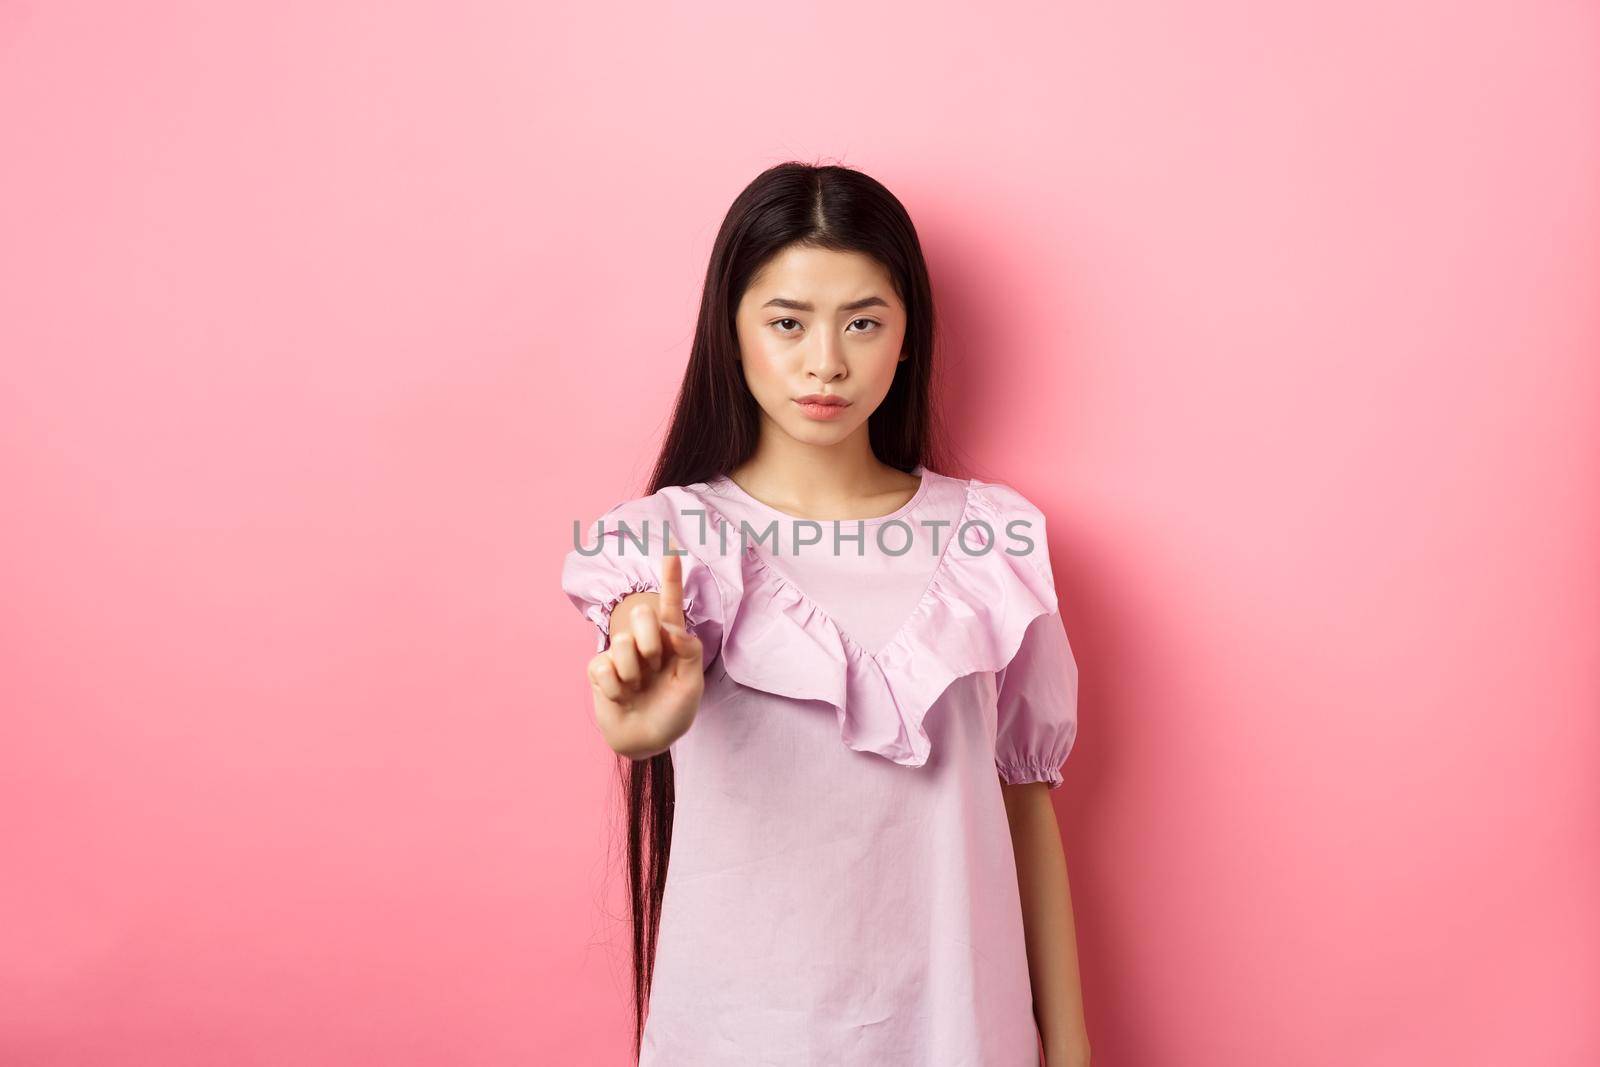 She says no. Serious asian girl shaking finger in stop gesture, prohibit and disagree with person, scolding bad behaviour, standing against pink background by Benzoix